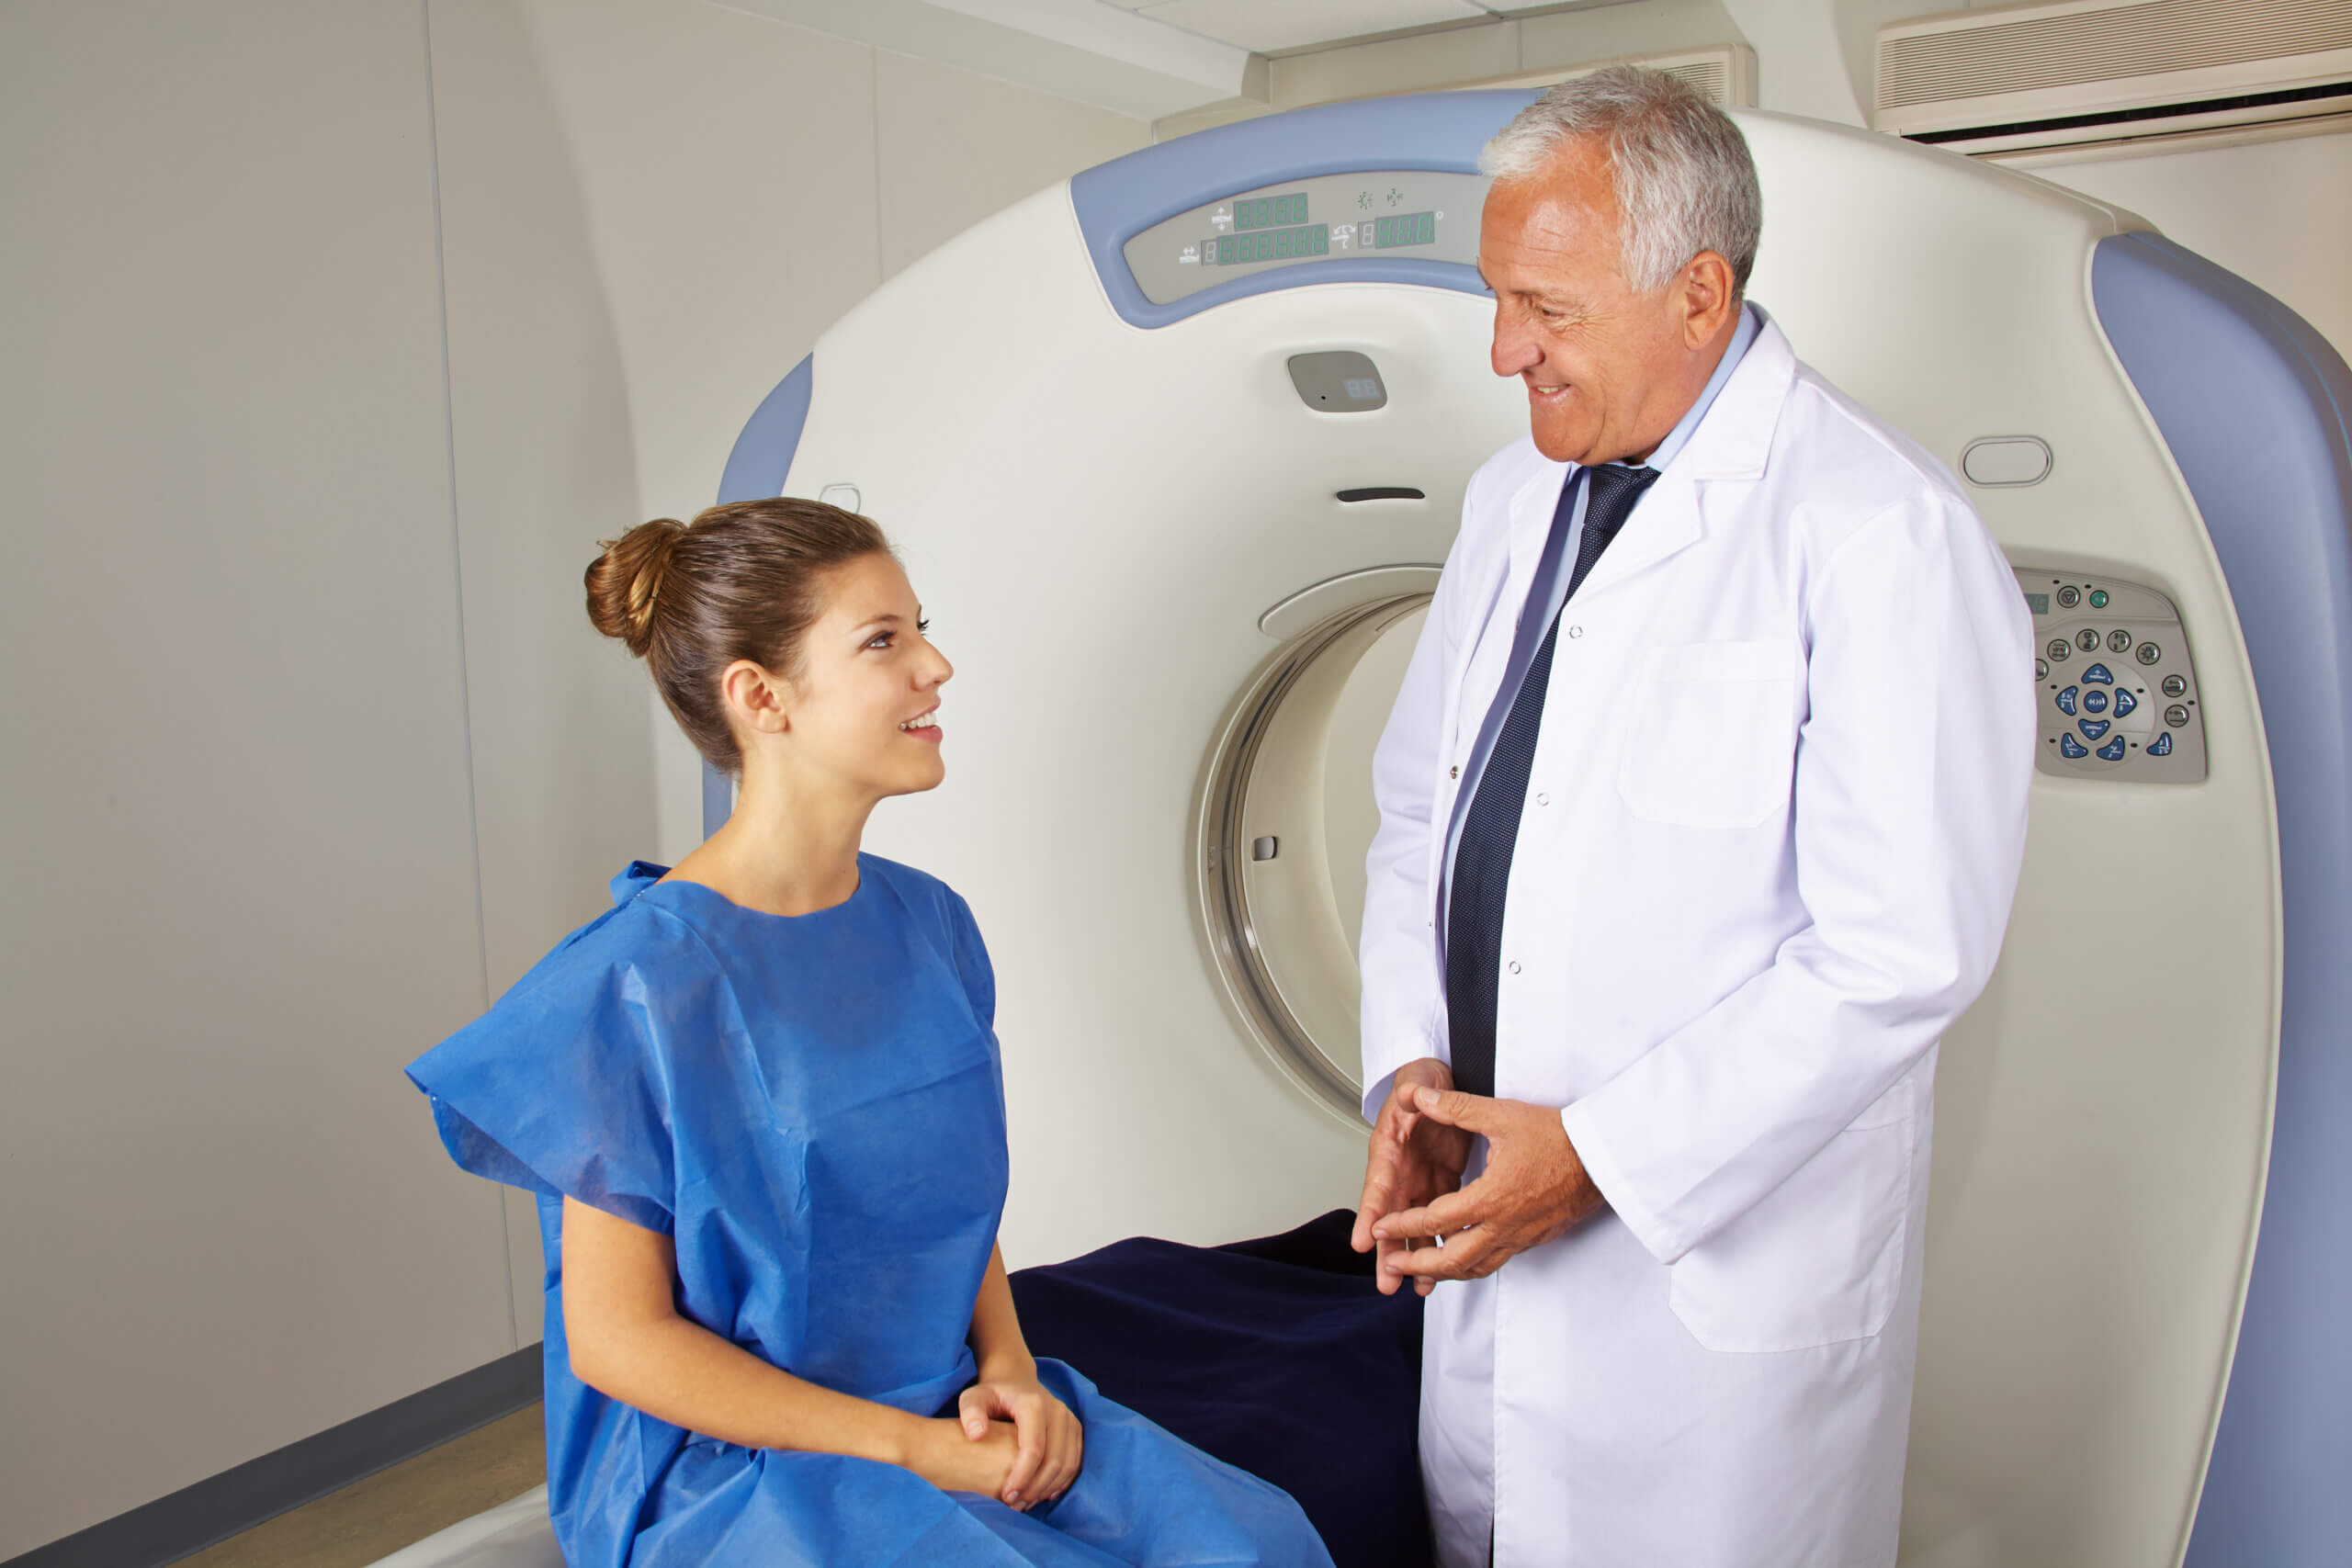 A doctor prepping his patient as she sits on the MRI machine bed.